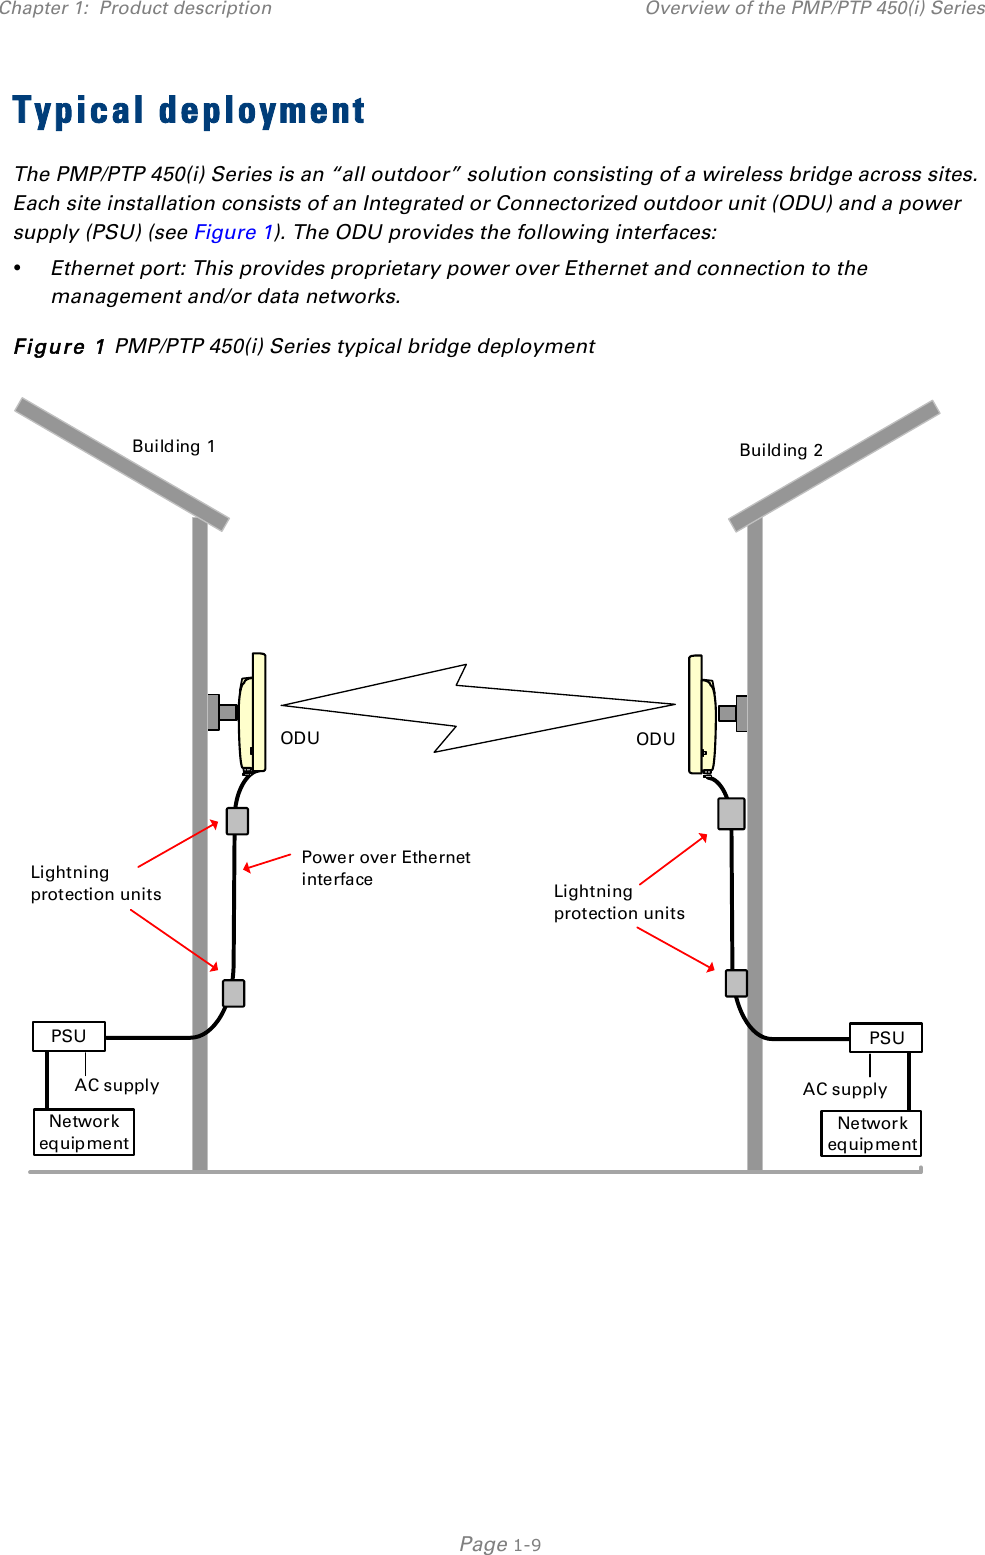 Chapter 1:  Product description Overview of the PMP/PTP 450(i) Series   Page 1-9 Typical deployment The PMP/PTP 450(i) Series is an “all outdoor” solution consisting of a wireless bridge across sites. Each site installation consists of an Integrated or Connectorized outdoor unit (ODU) and a power supply (PSU) (see Figure 1). The ODU provides the following interfaces: • Ethernet port: This provides proprietary power over Ethernet and connection to the management and/or data networks. Figure 1 PMP/PTP 450(i) Series typical bridge deployment  Building 1ODUAC supplyPSUNetworkequipmentBuilding 2ODUPSUNetworkequipmentAC supplyPower over Ethernet interface Lightning protection unitsLightning protection units   